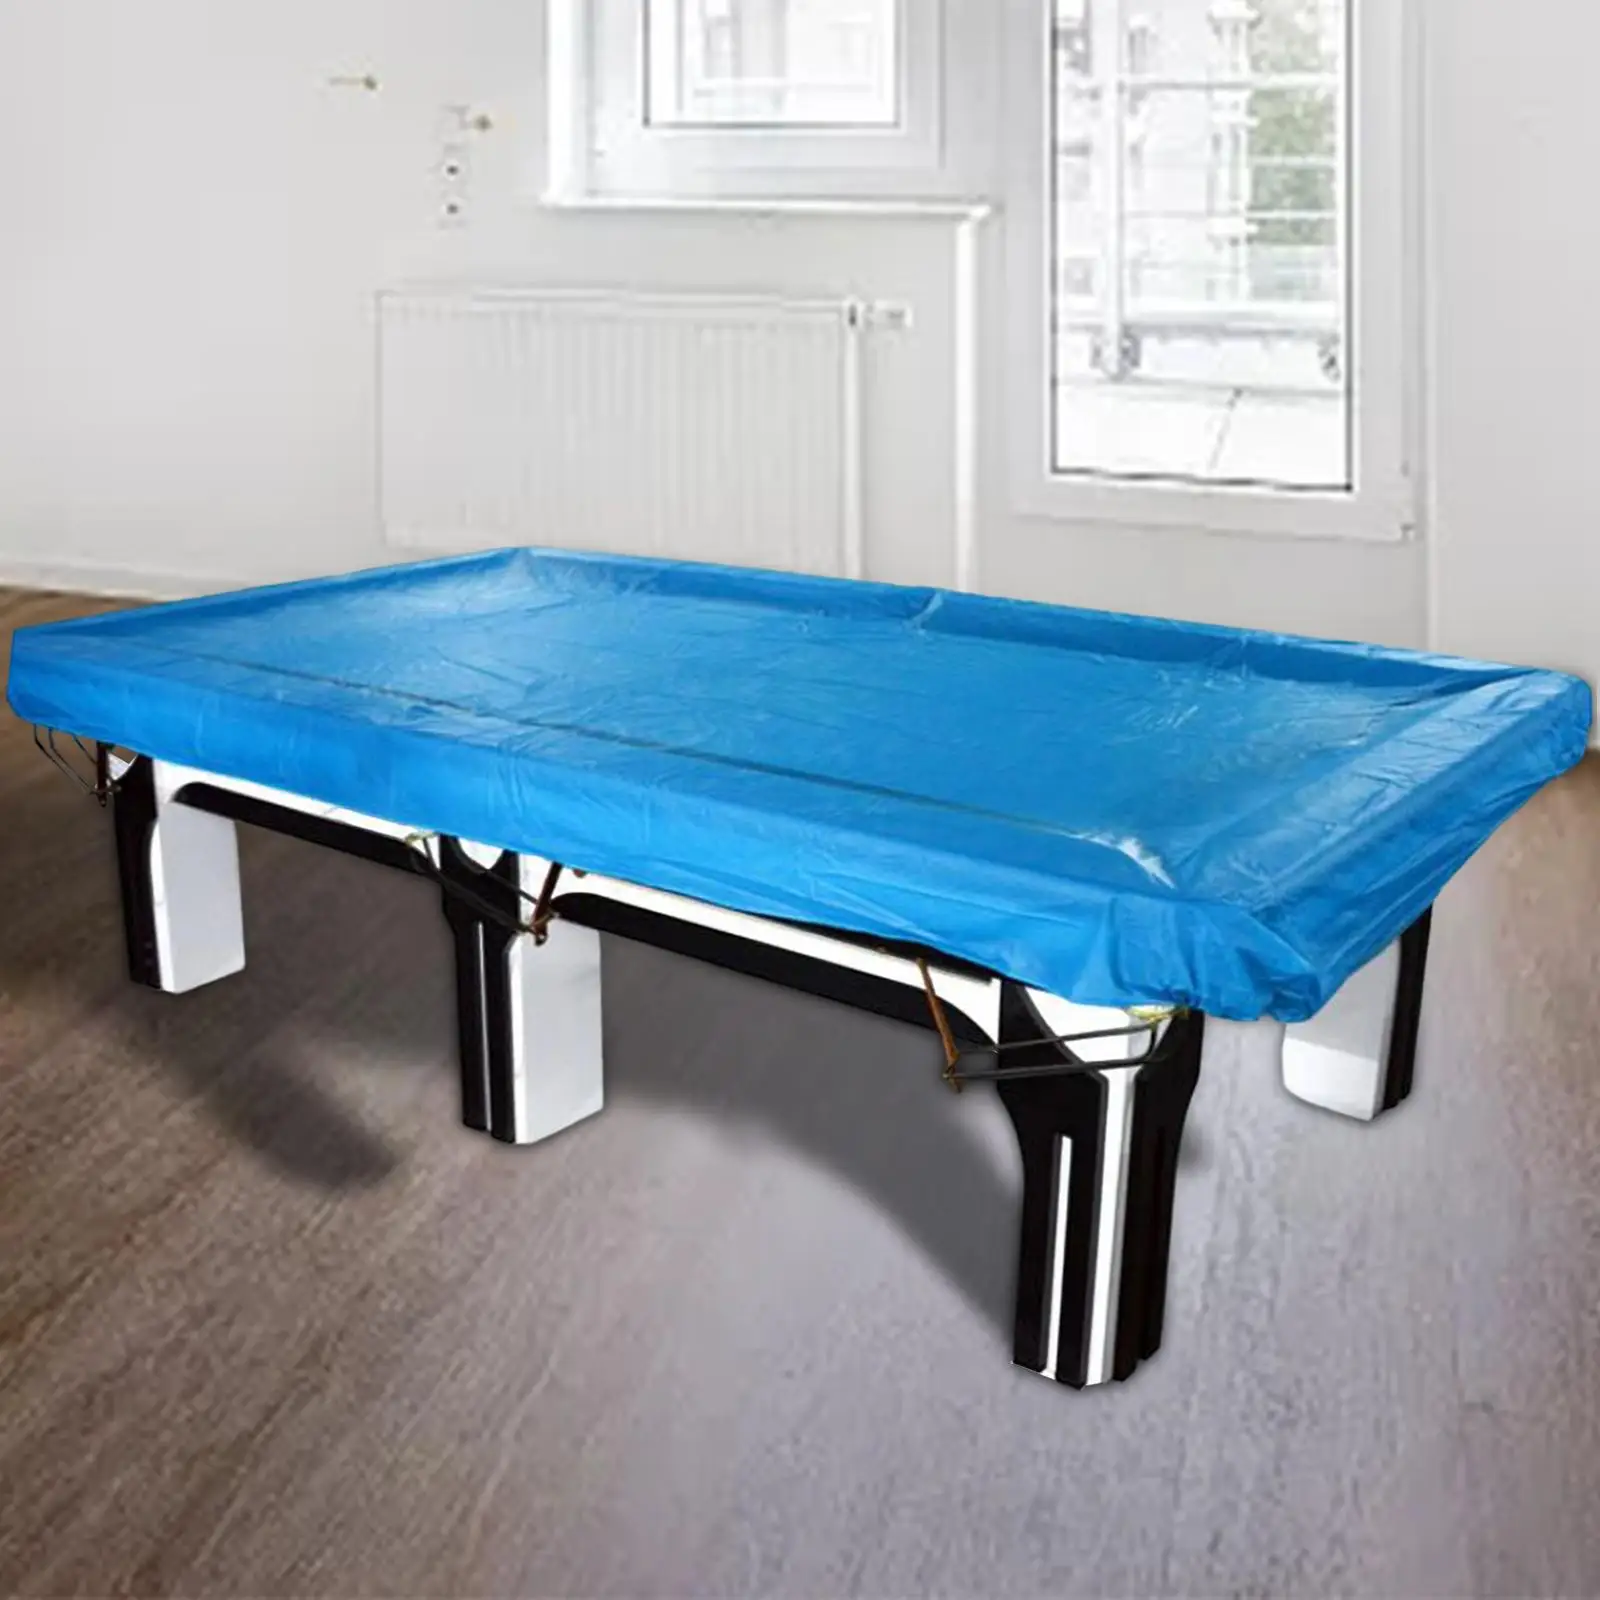 7/8/9/10/12ft Billiard Cover PVC Waterproof Table Protector with Drawstring Dustproof Pool Table Cover